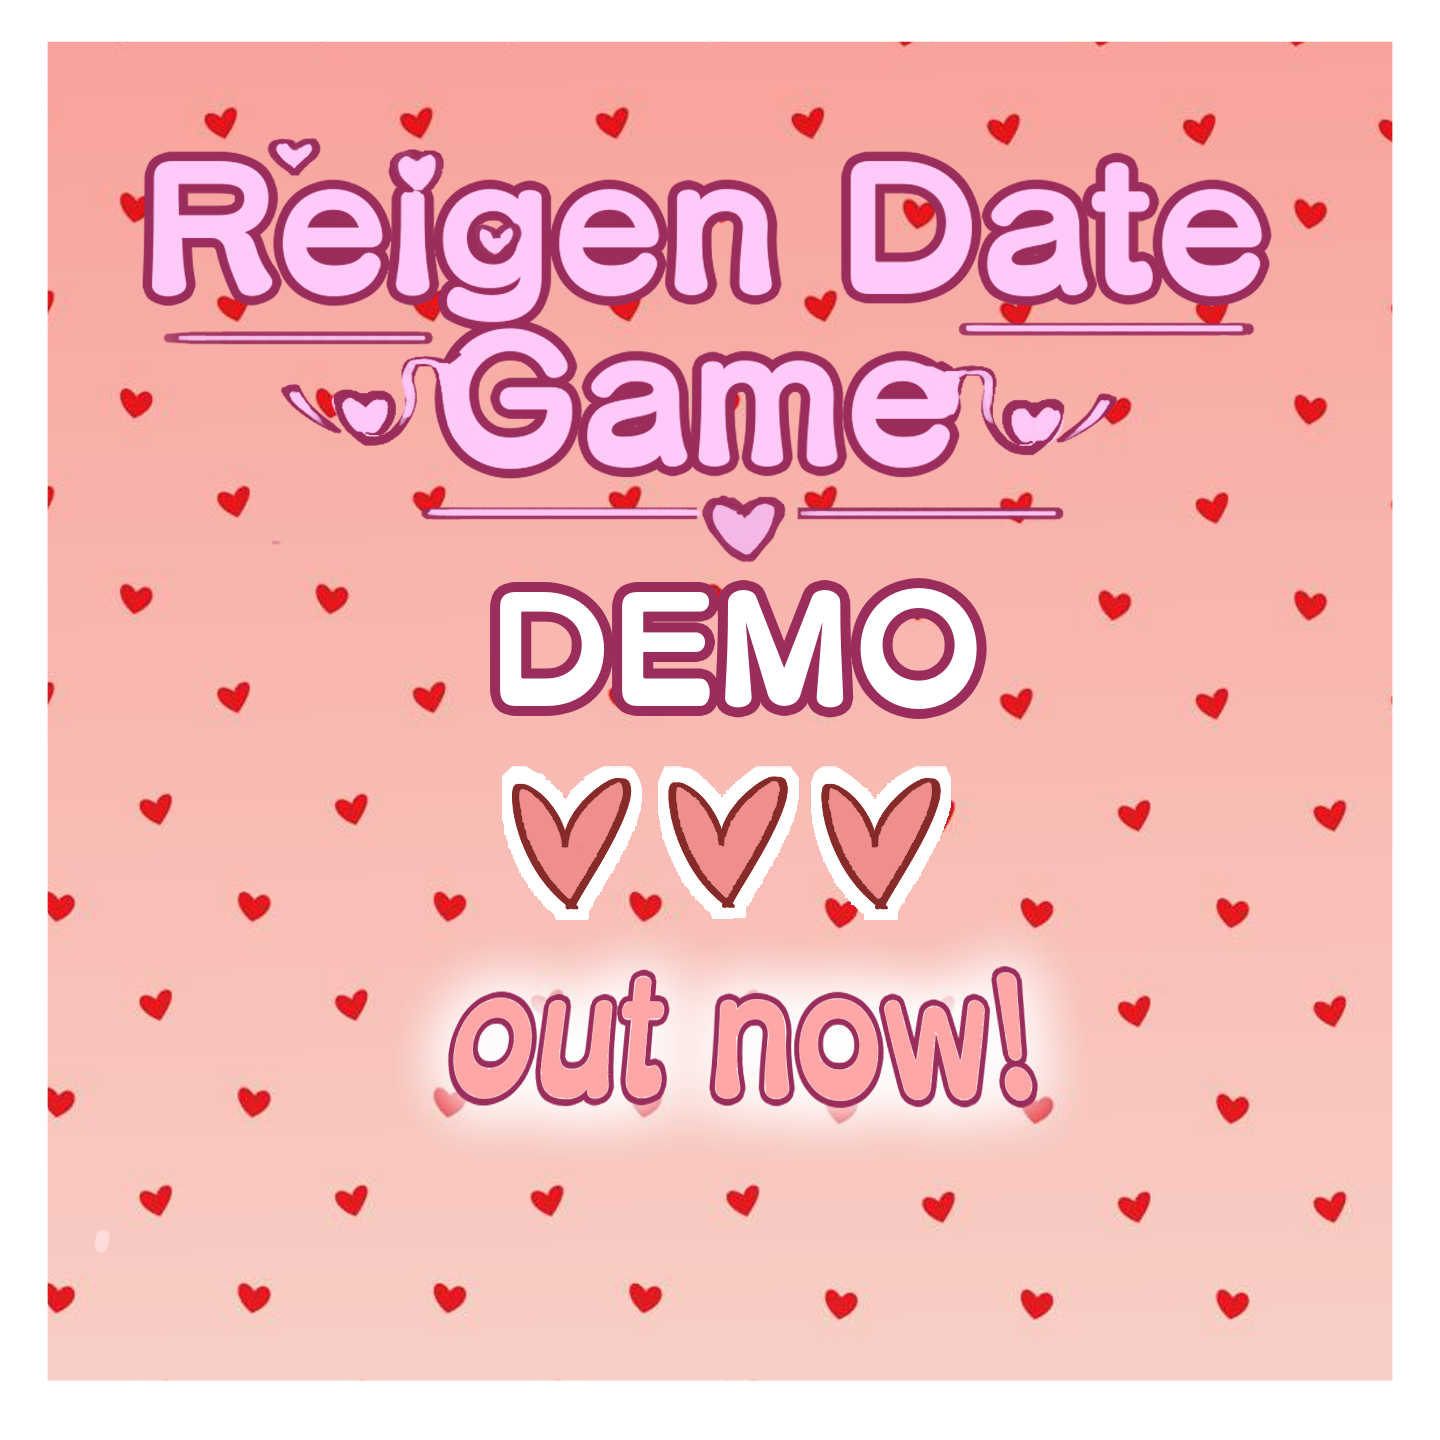 DEMO OUT! - Reigen Date Game by Ash